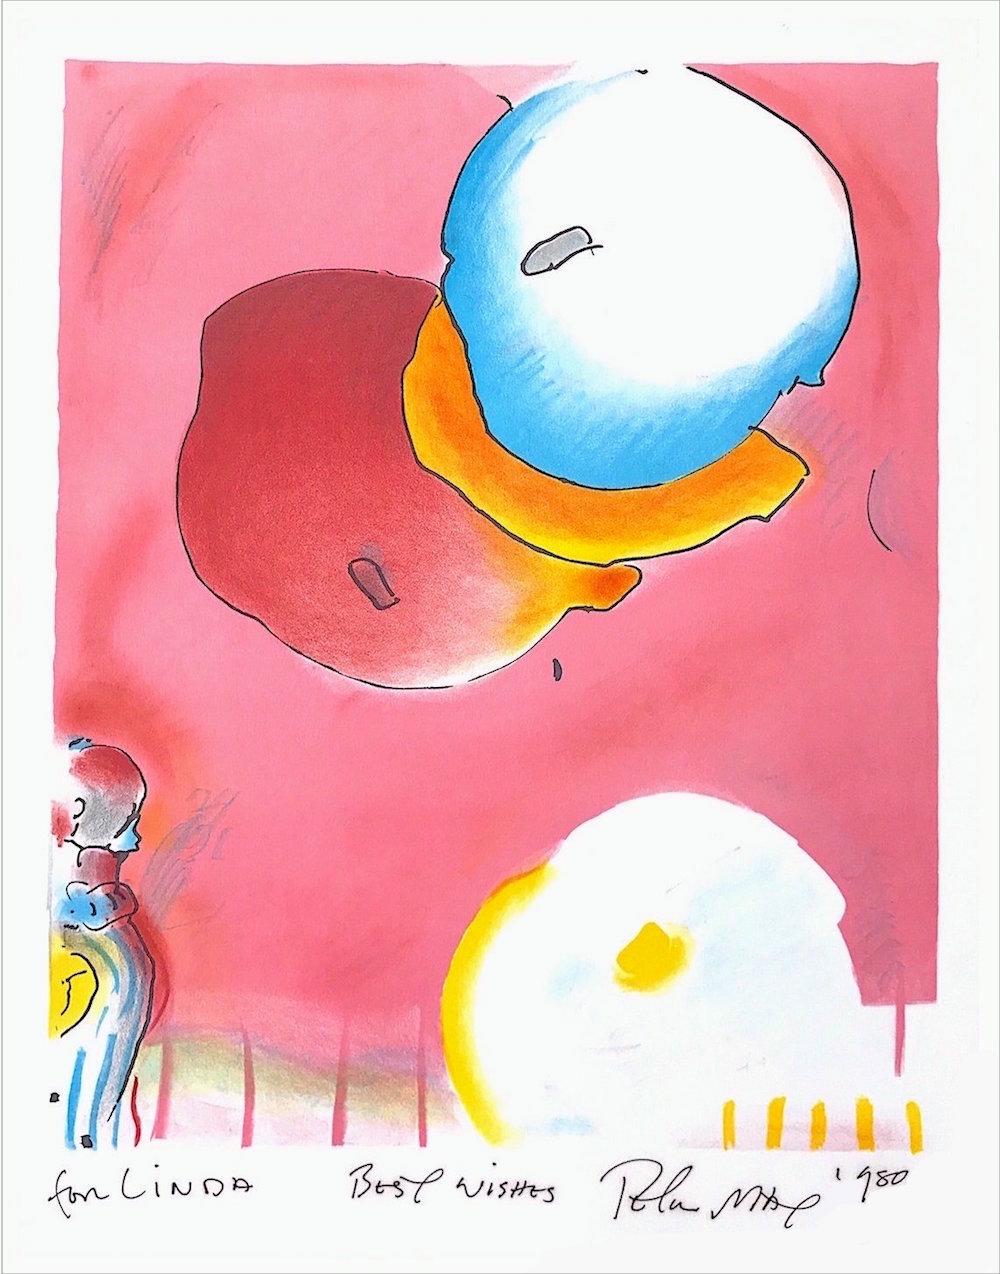 TWO FLOATING Signed Lithograph, Abstract Balloons, Pop Art, Red Pink Yellow Blue